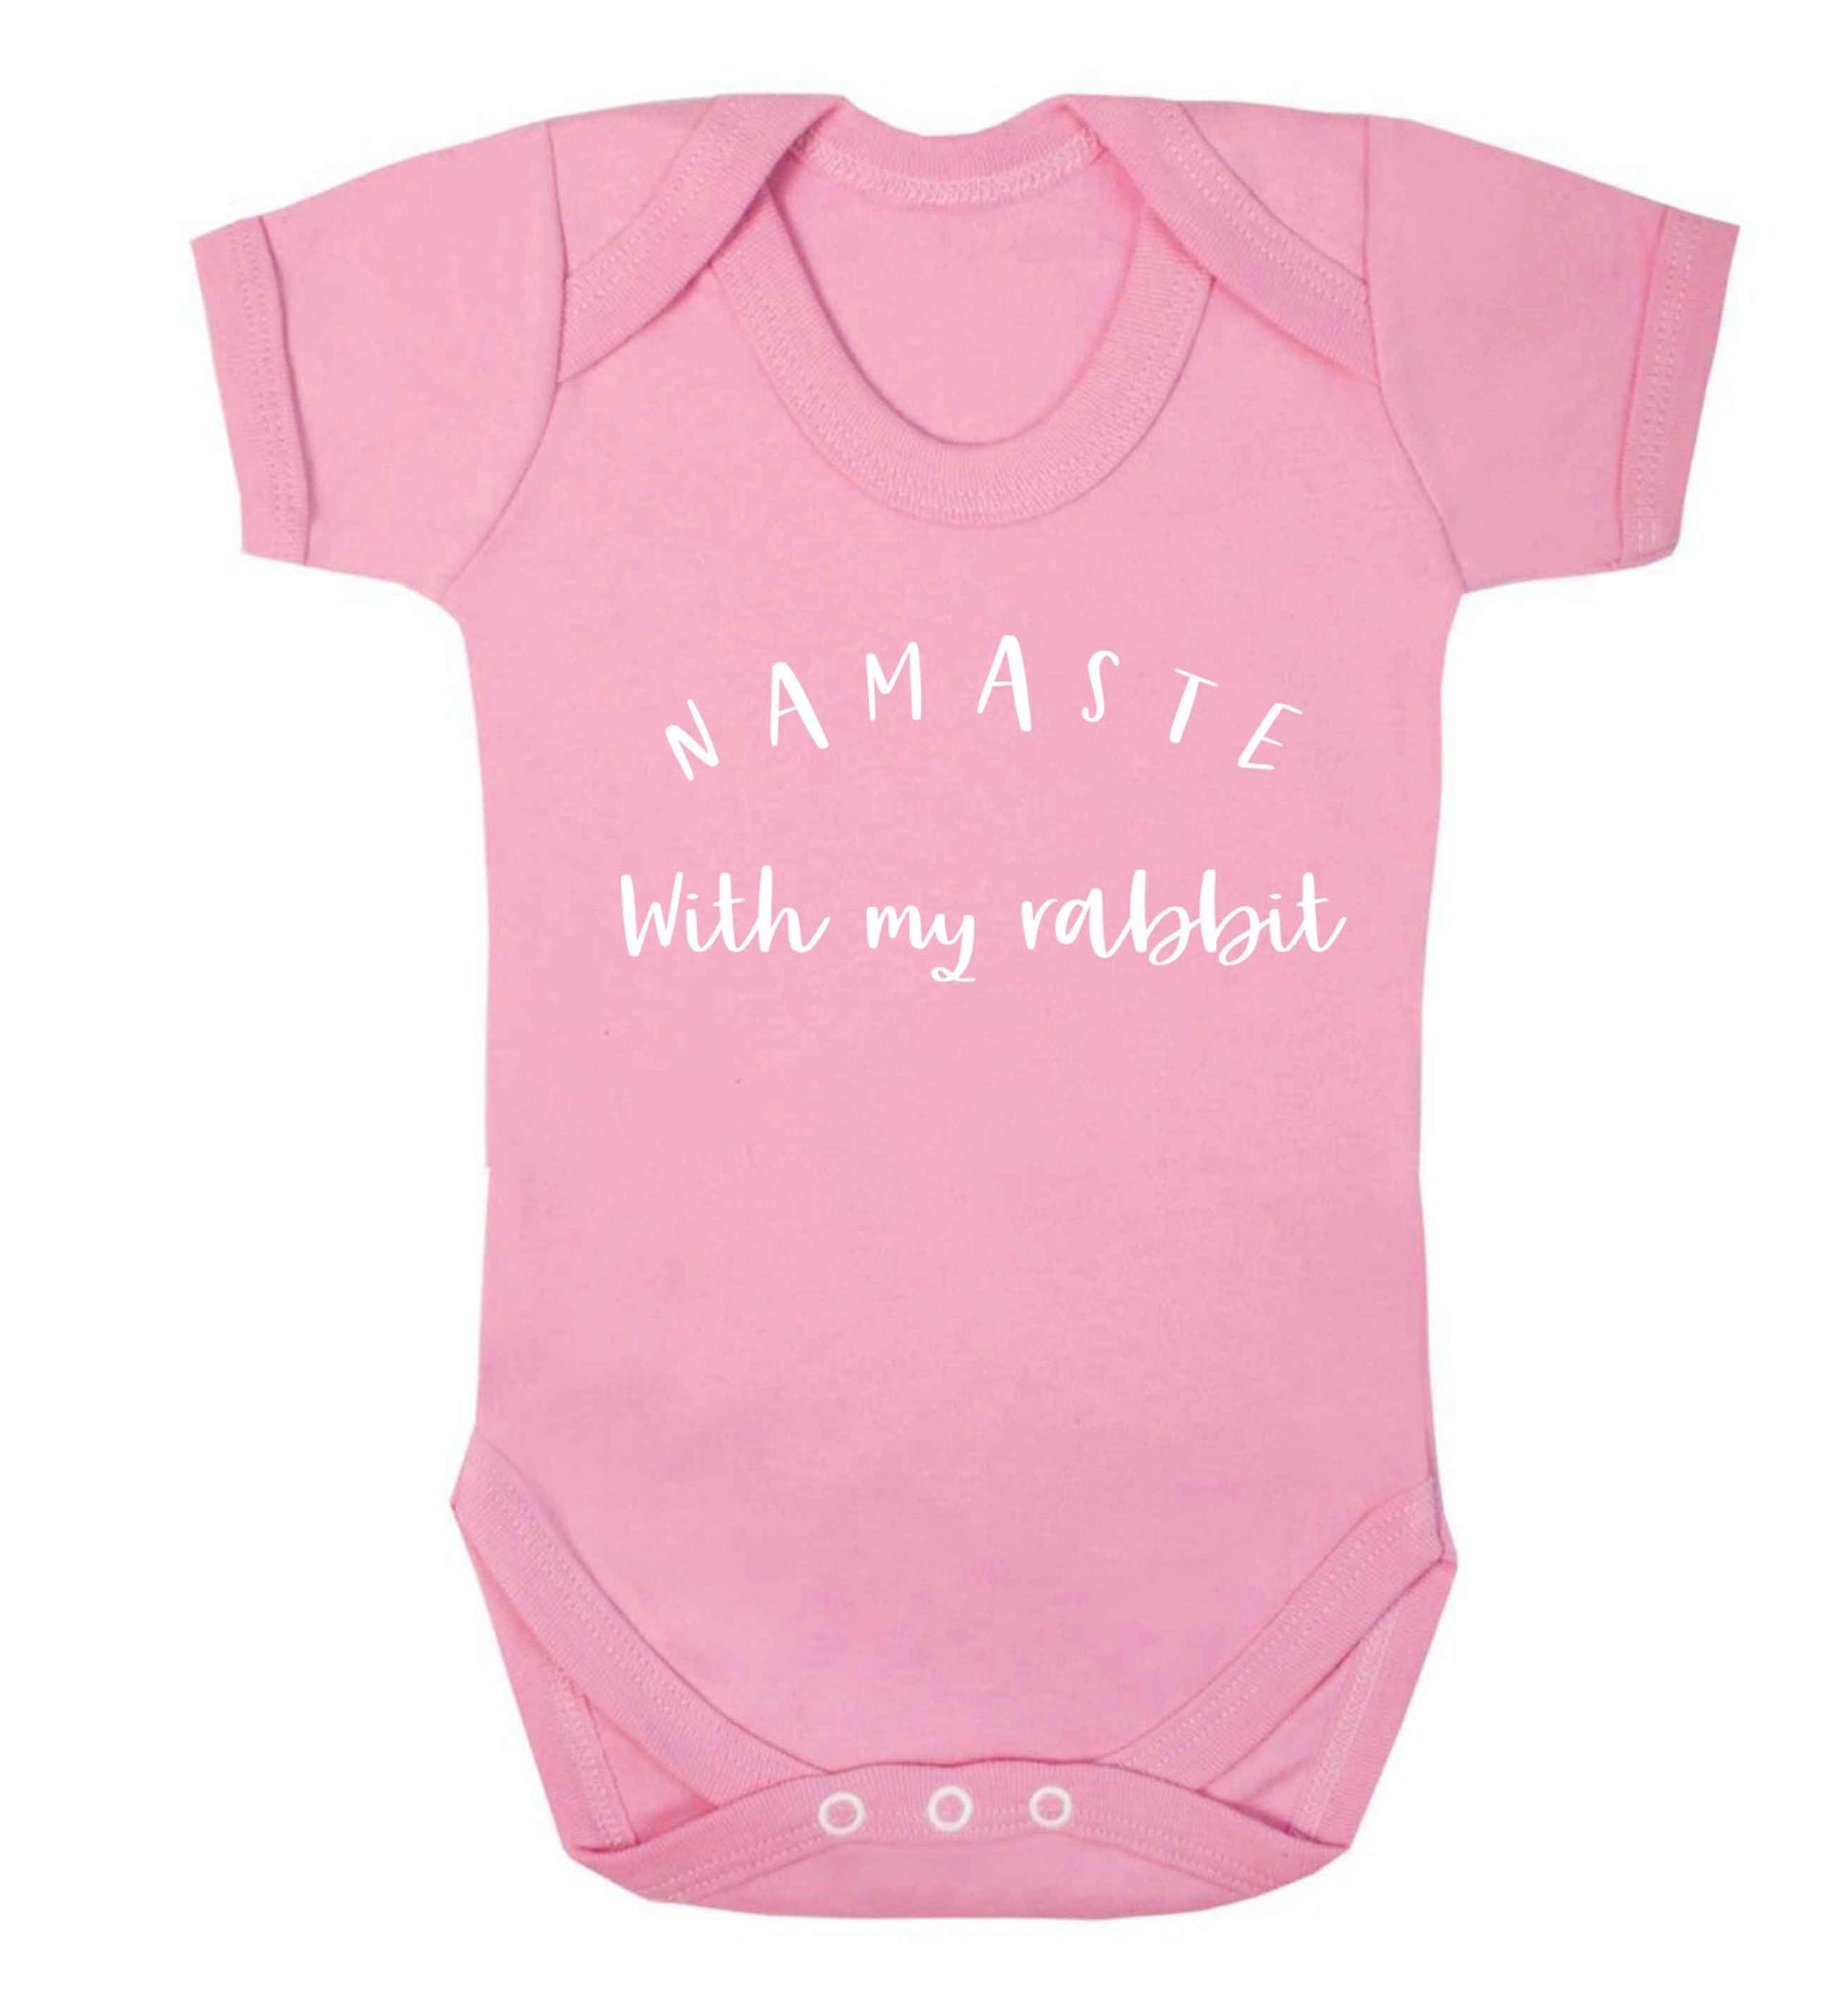 Namaste with my rabbit Baby Vest pale pink 18-24 months